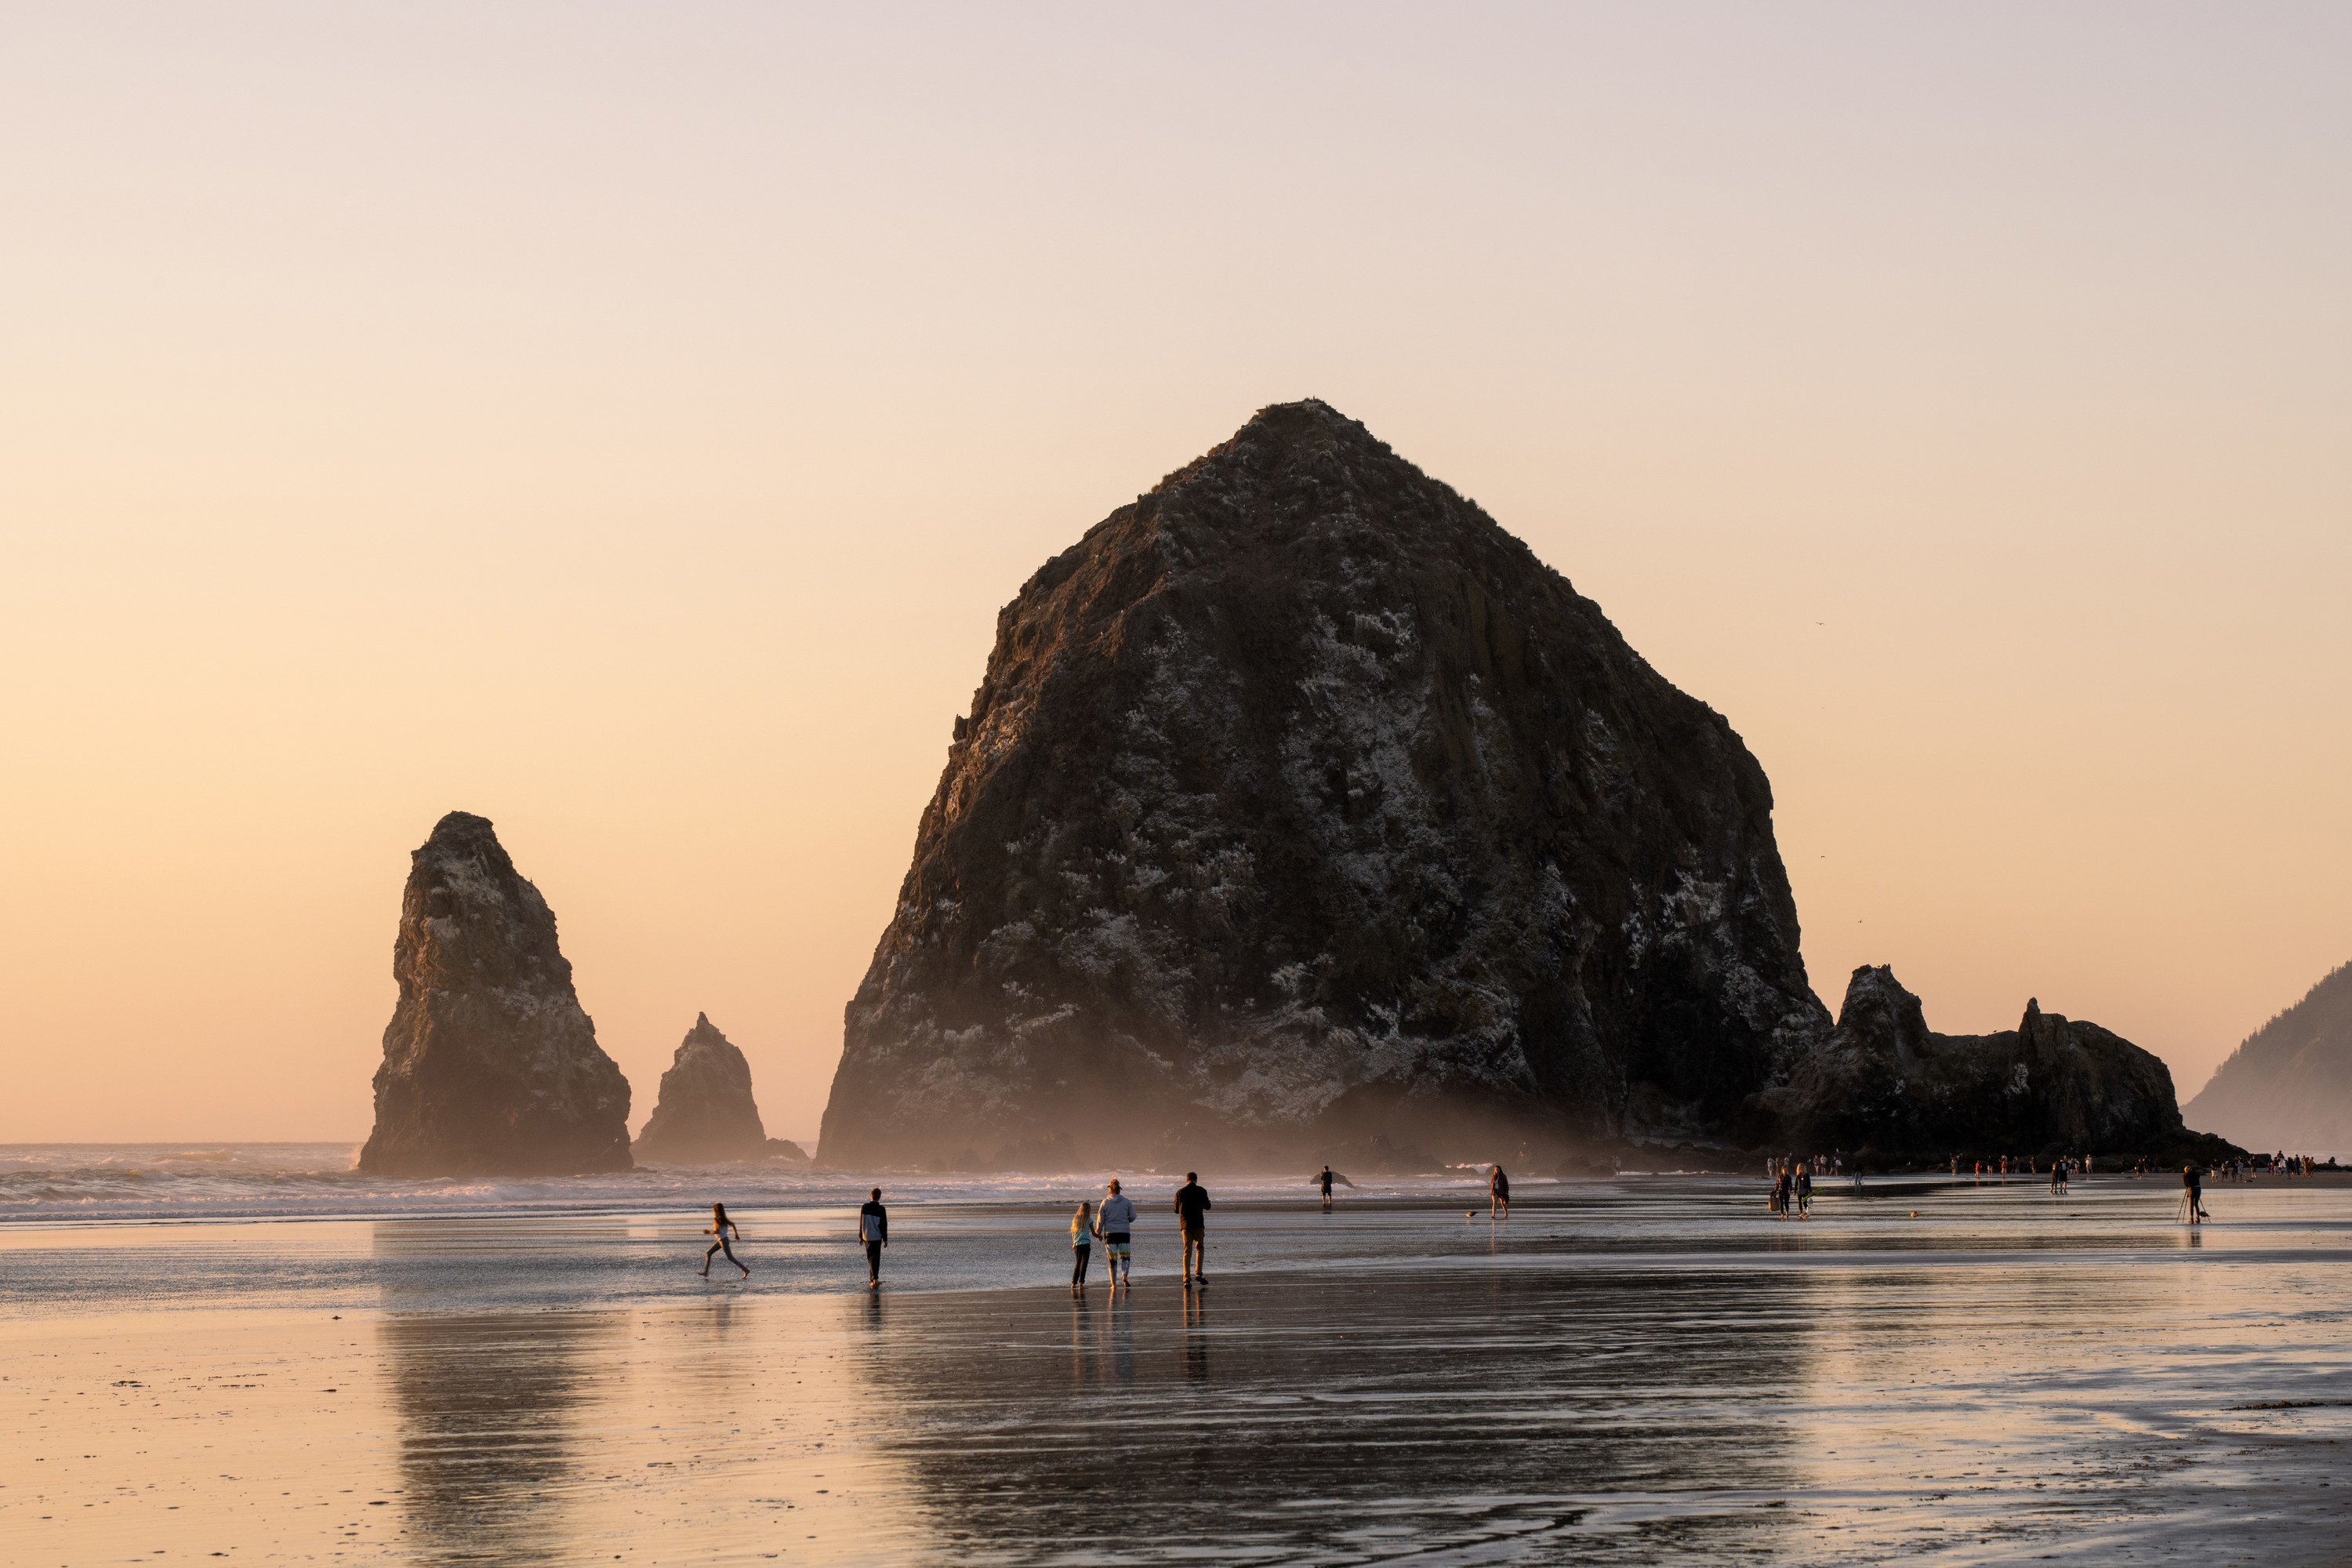 People walk by the enormous rocks at Cannon Beach in Oregon during a misty sunset